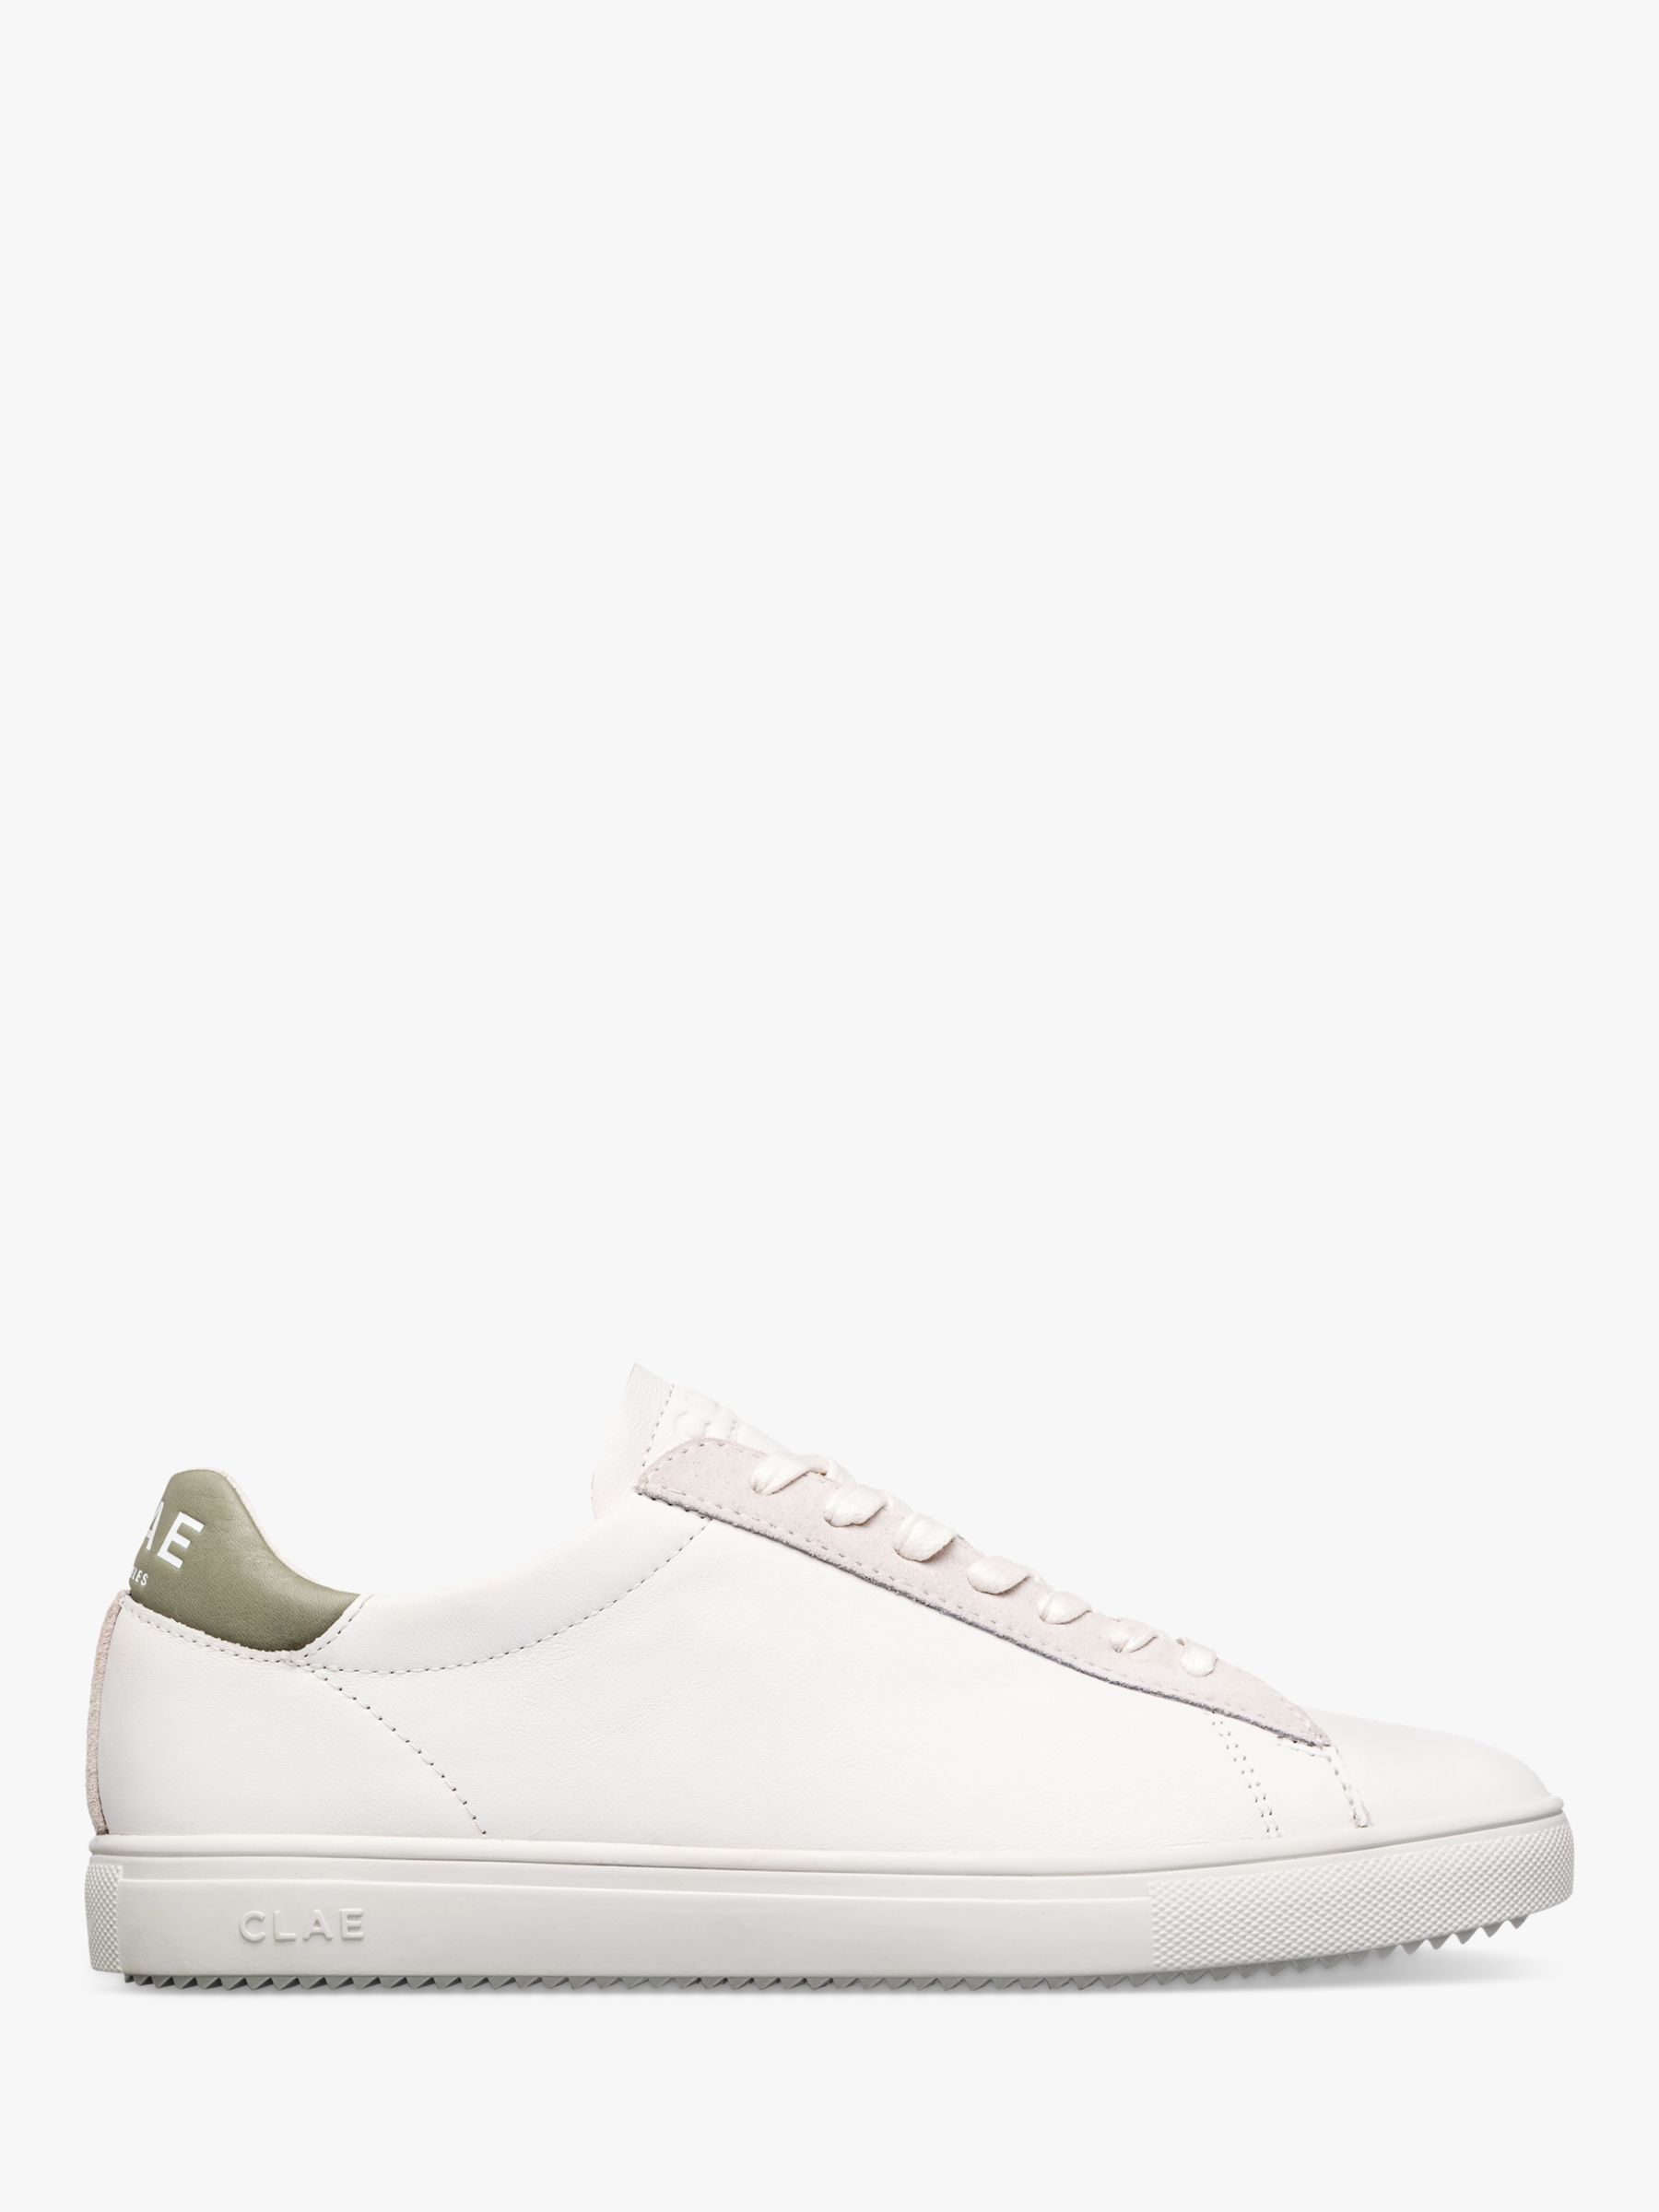 CLAE Bradley Whitel Lace Up Trainers, White, 5